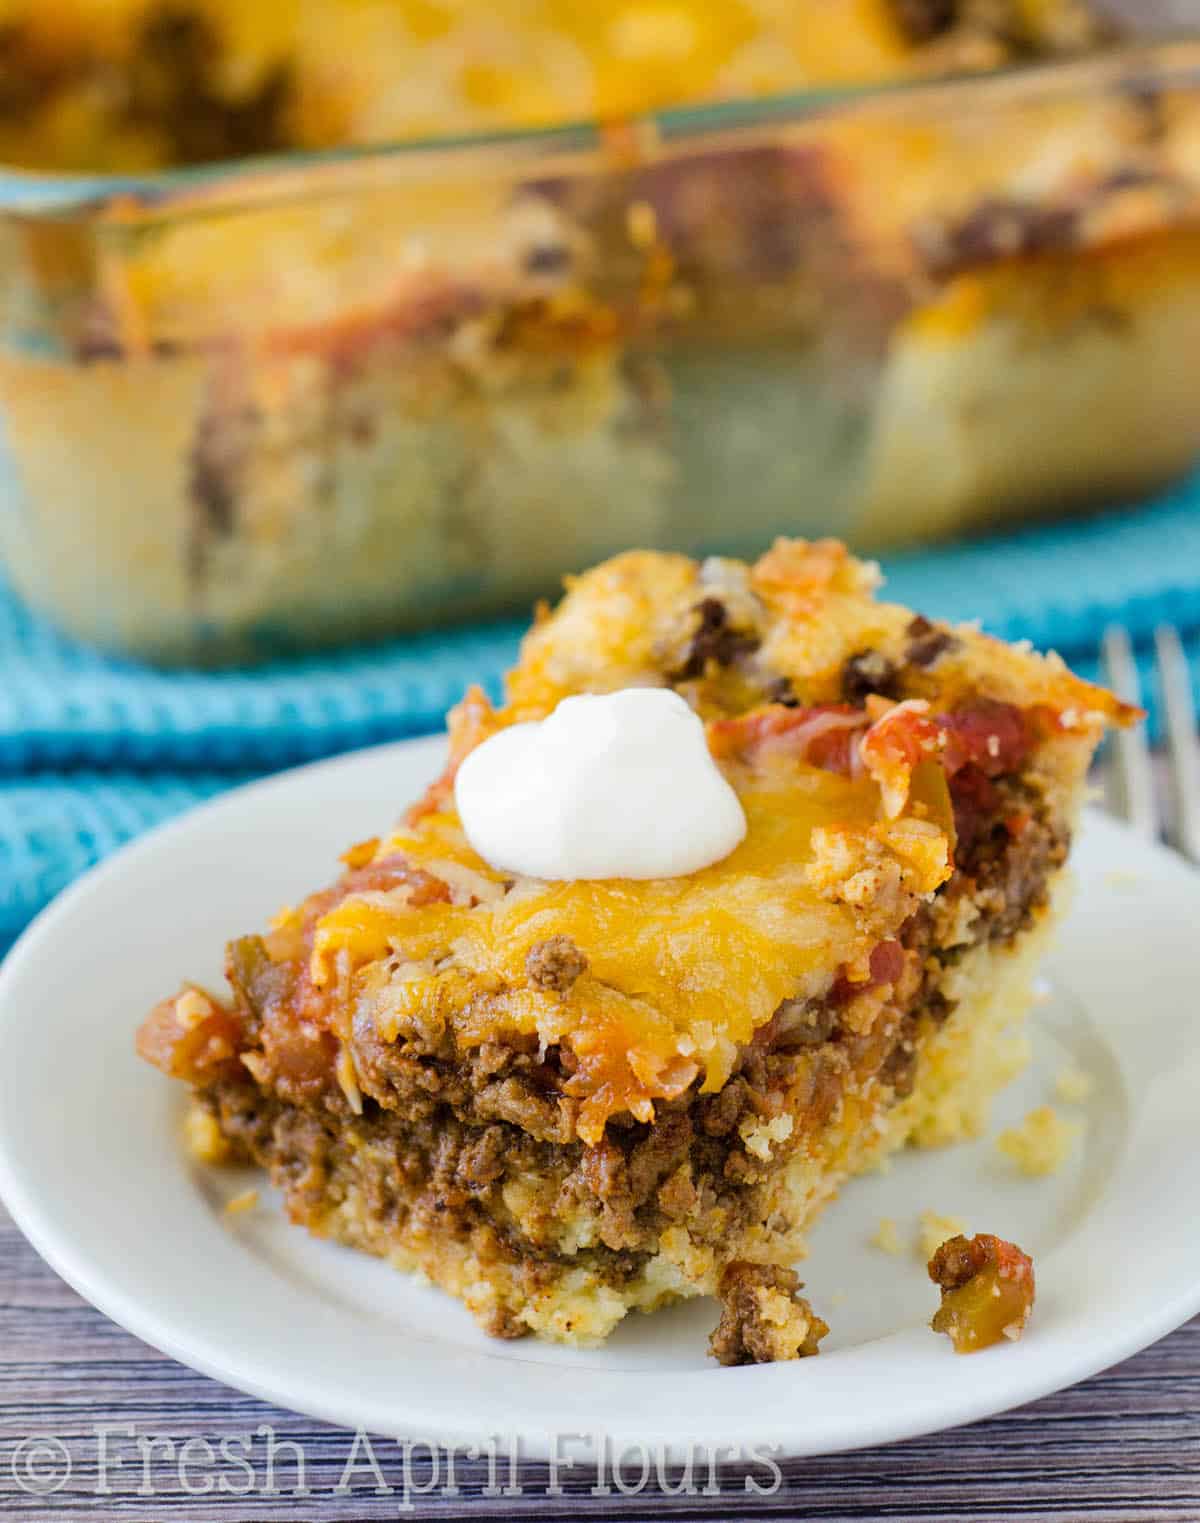 Baked Taco Casserole: An easy casserole layered with quick cornbread, seasoned meat, salsa, and cheese. Perfect for a quick weeknight meal and makes great leftovers!